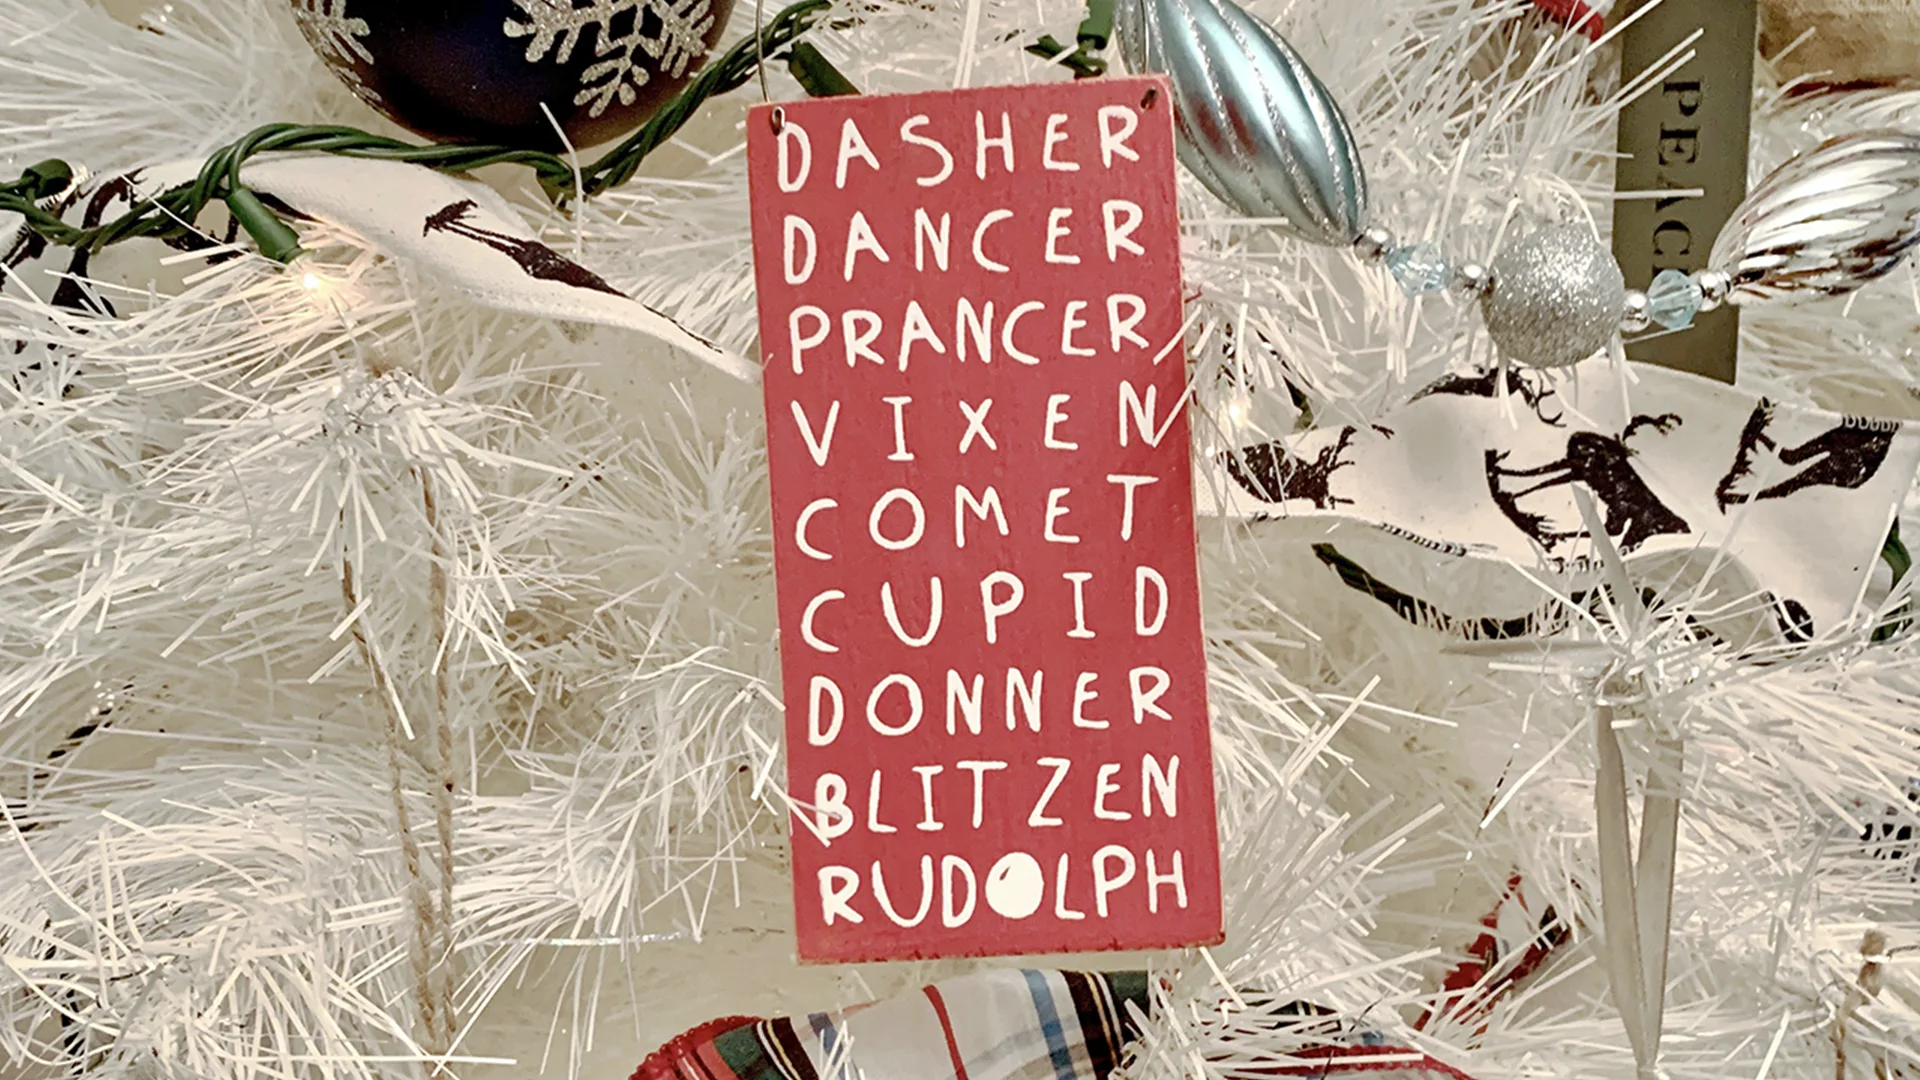 Reindeer names listed on a decoration on a tree